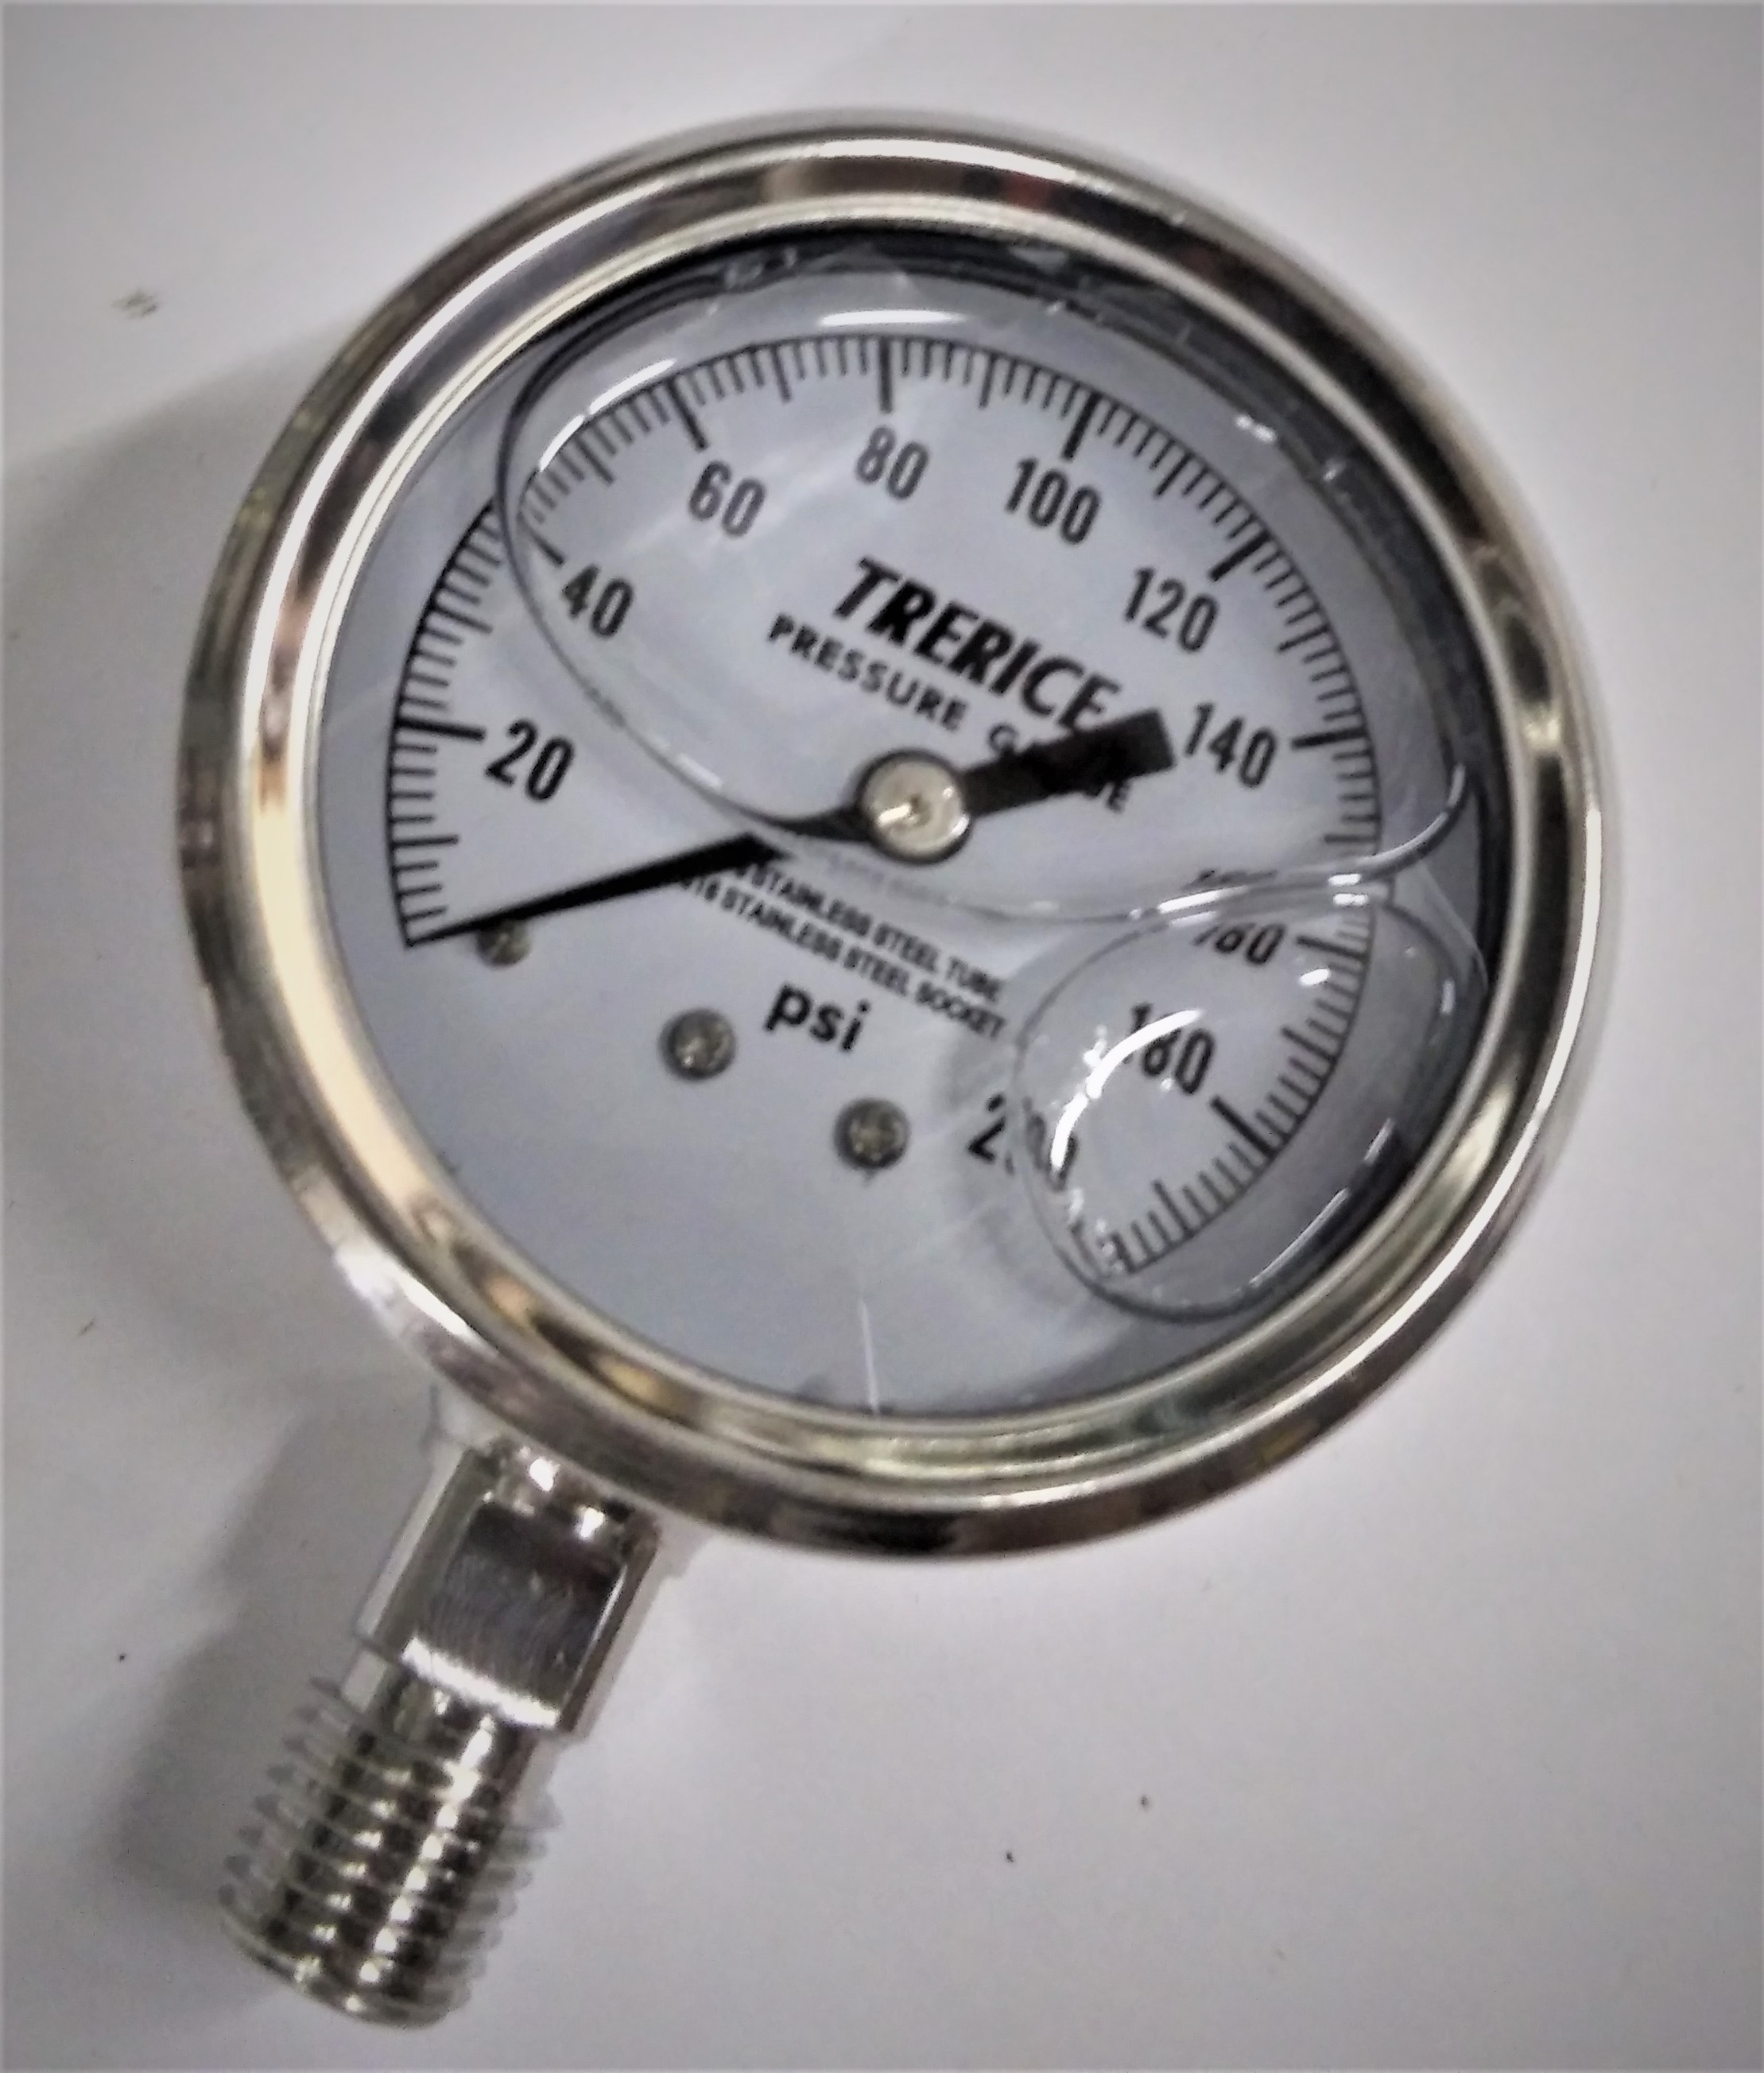 Trerice 0 - 200psi 2-1/2in Liquid Filled Gauge with 1/4in Lower Mount Stainless  Steel Case and Stainless Steel Internals D83LFSS2502LA200 (Replaces  D83LFSS2502LA130) - A. Louis Supply